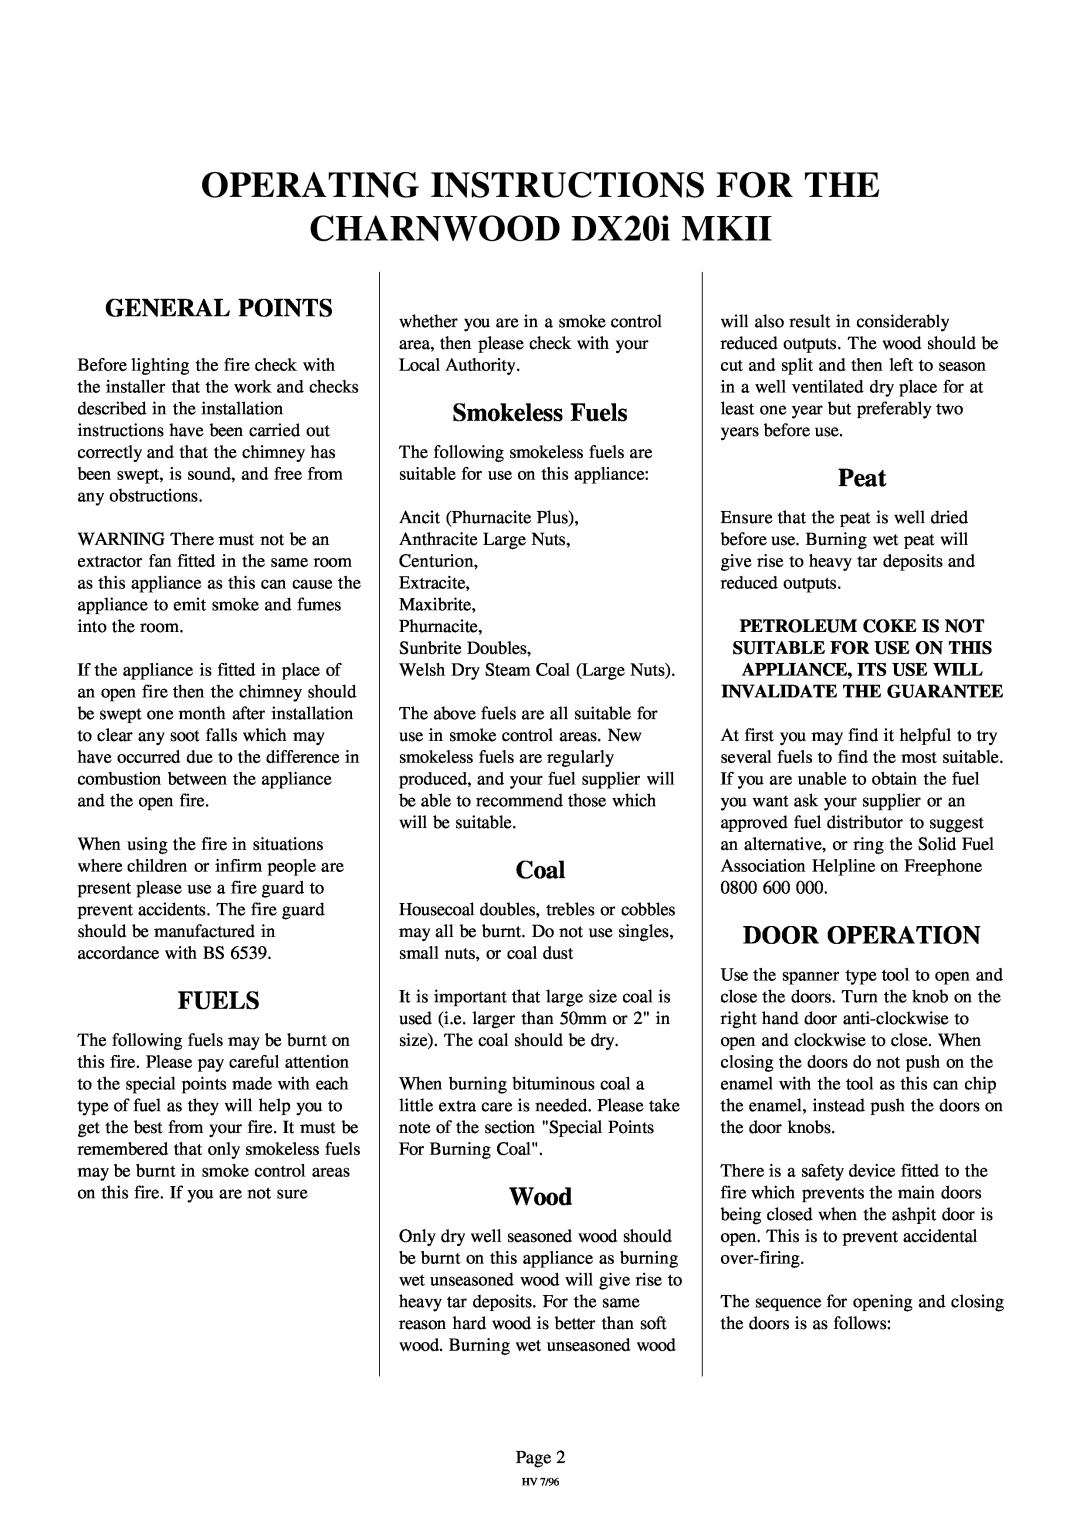 Charnwood DX20i MkII OPERATING INSTRUCTIONS FOR THE CHARNWOOD DX20i MKII, General Points, Smokeless Fuels, Coal, Wood 